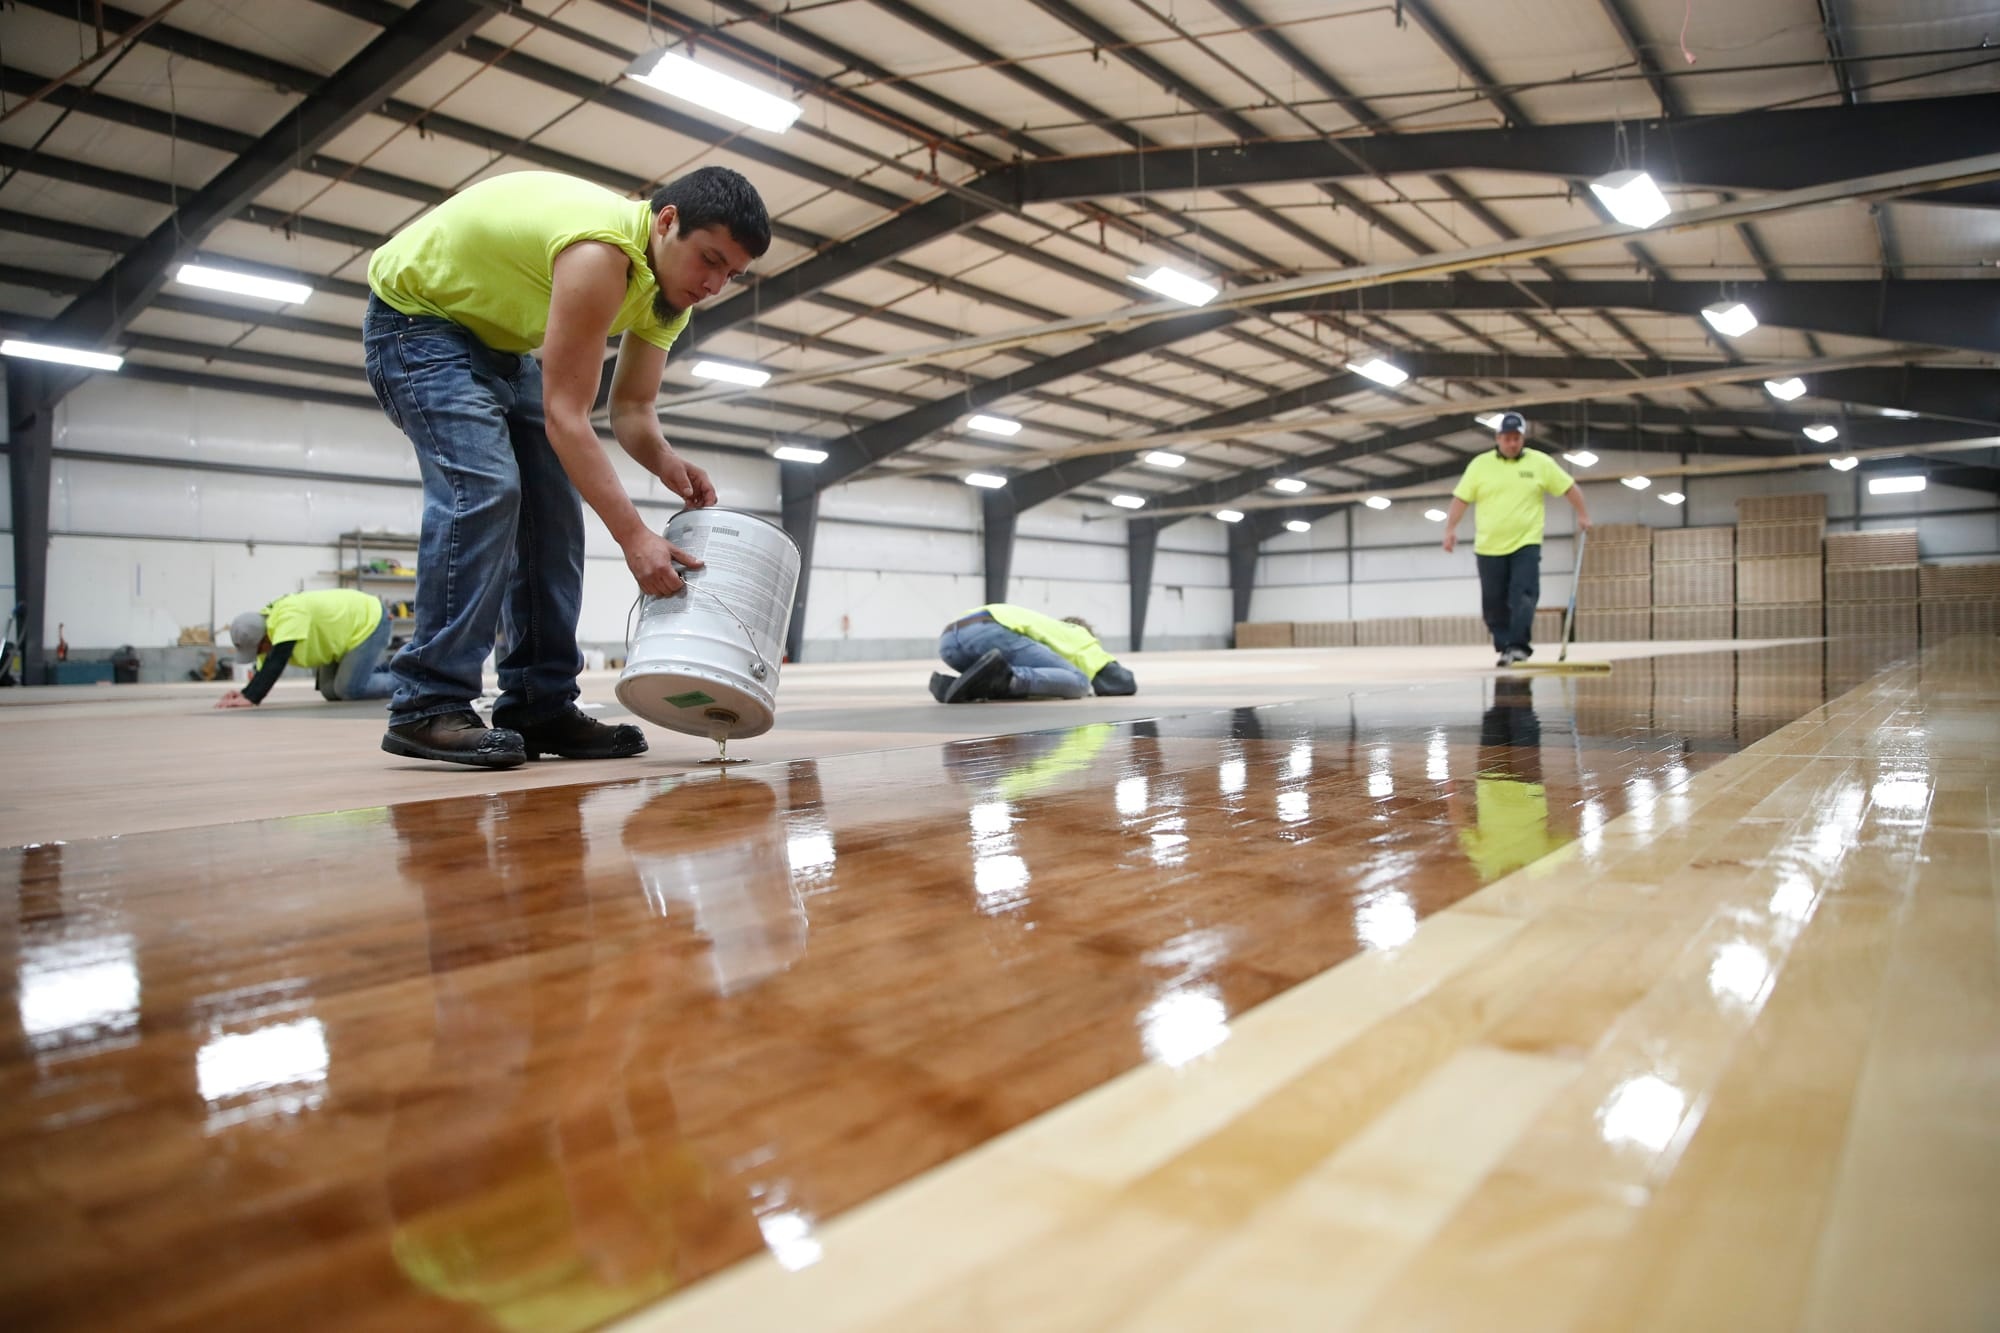 About Connor Premier Dance Floor Basketball Court Contractor